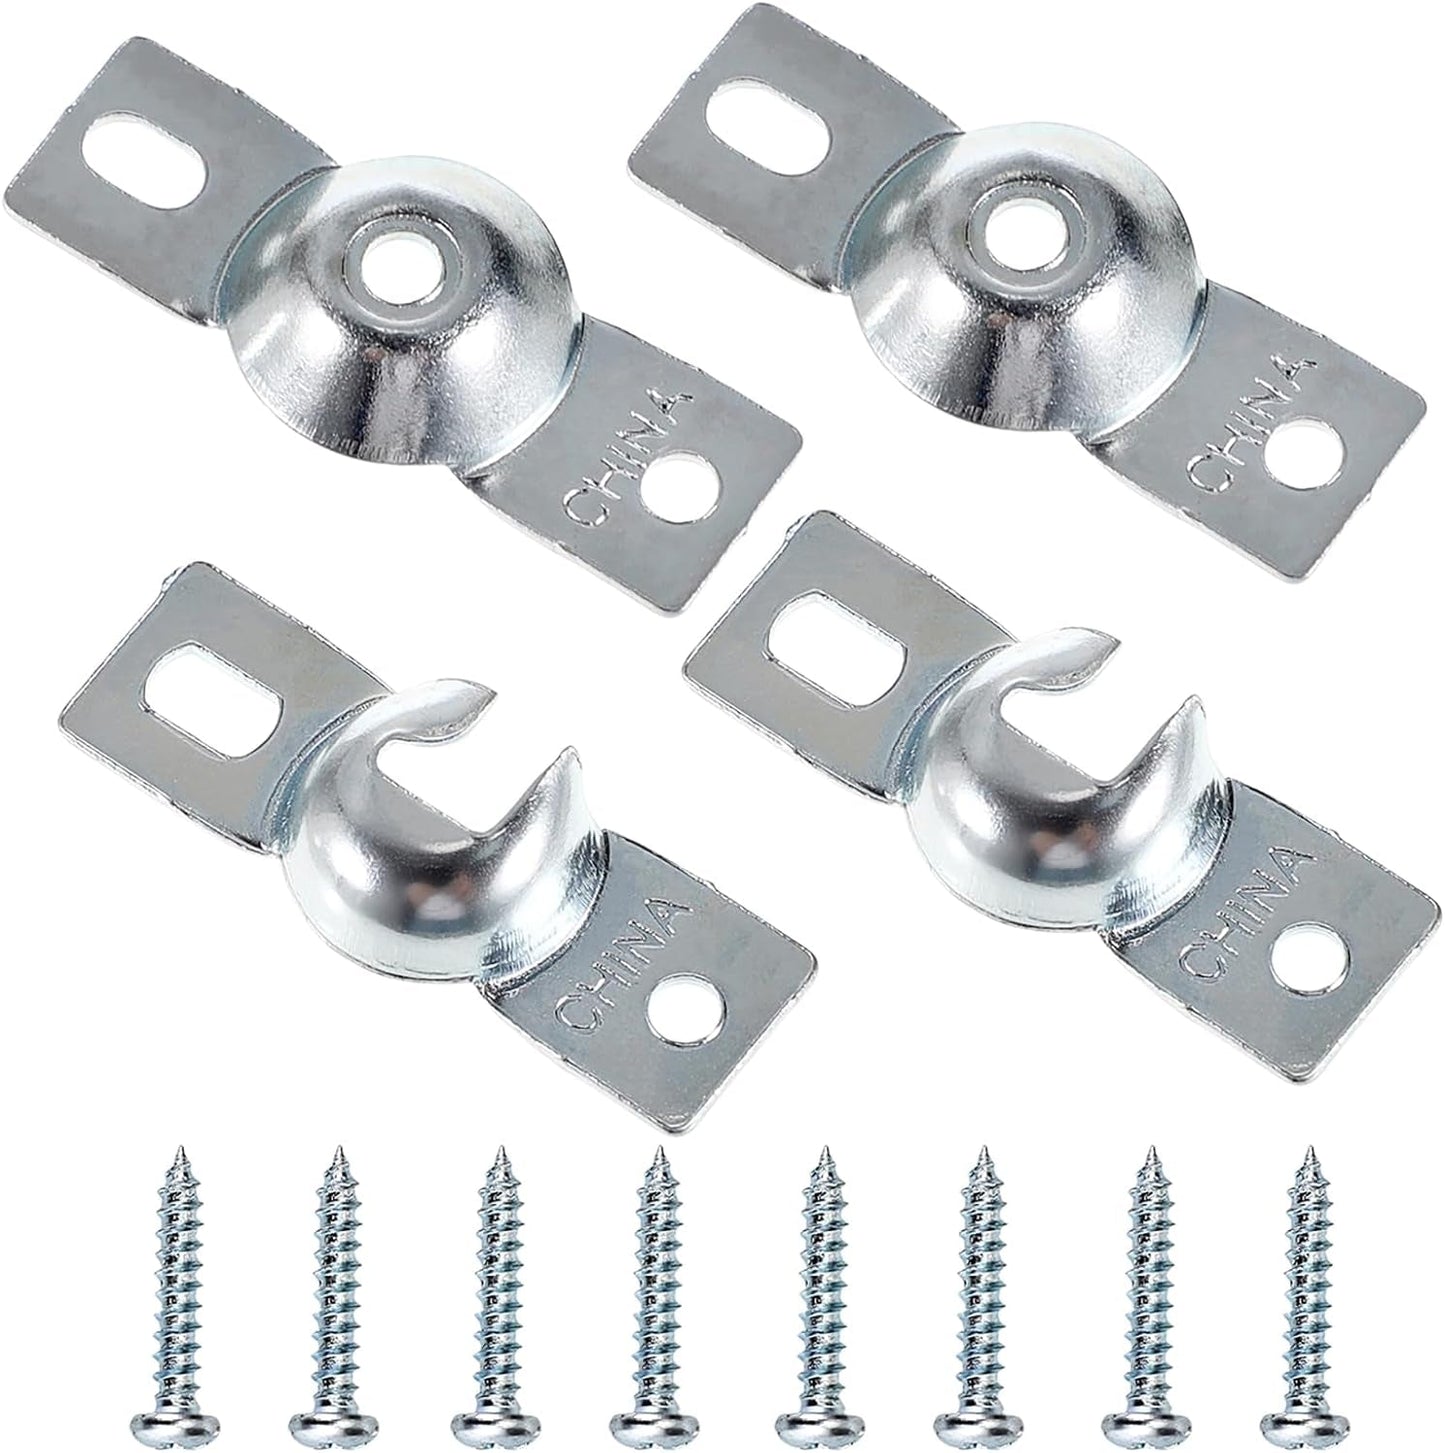 Sumnacon Metal Window Shade Brackets-4Pcs Roller Shade Hardware inside Mount with Screws,Sturdy Roller Shades Bracket for Living Room,Bedroom,Offices